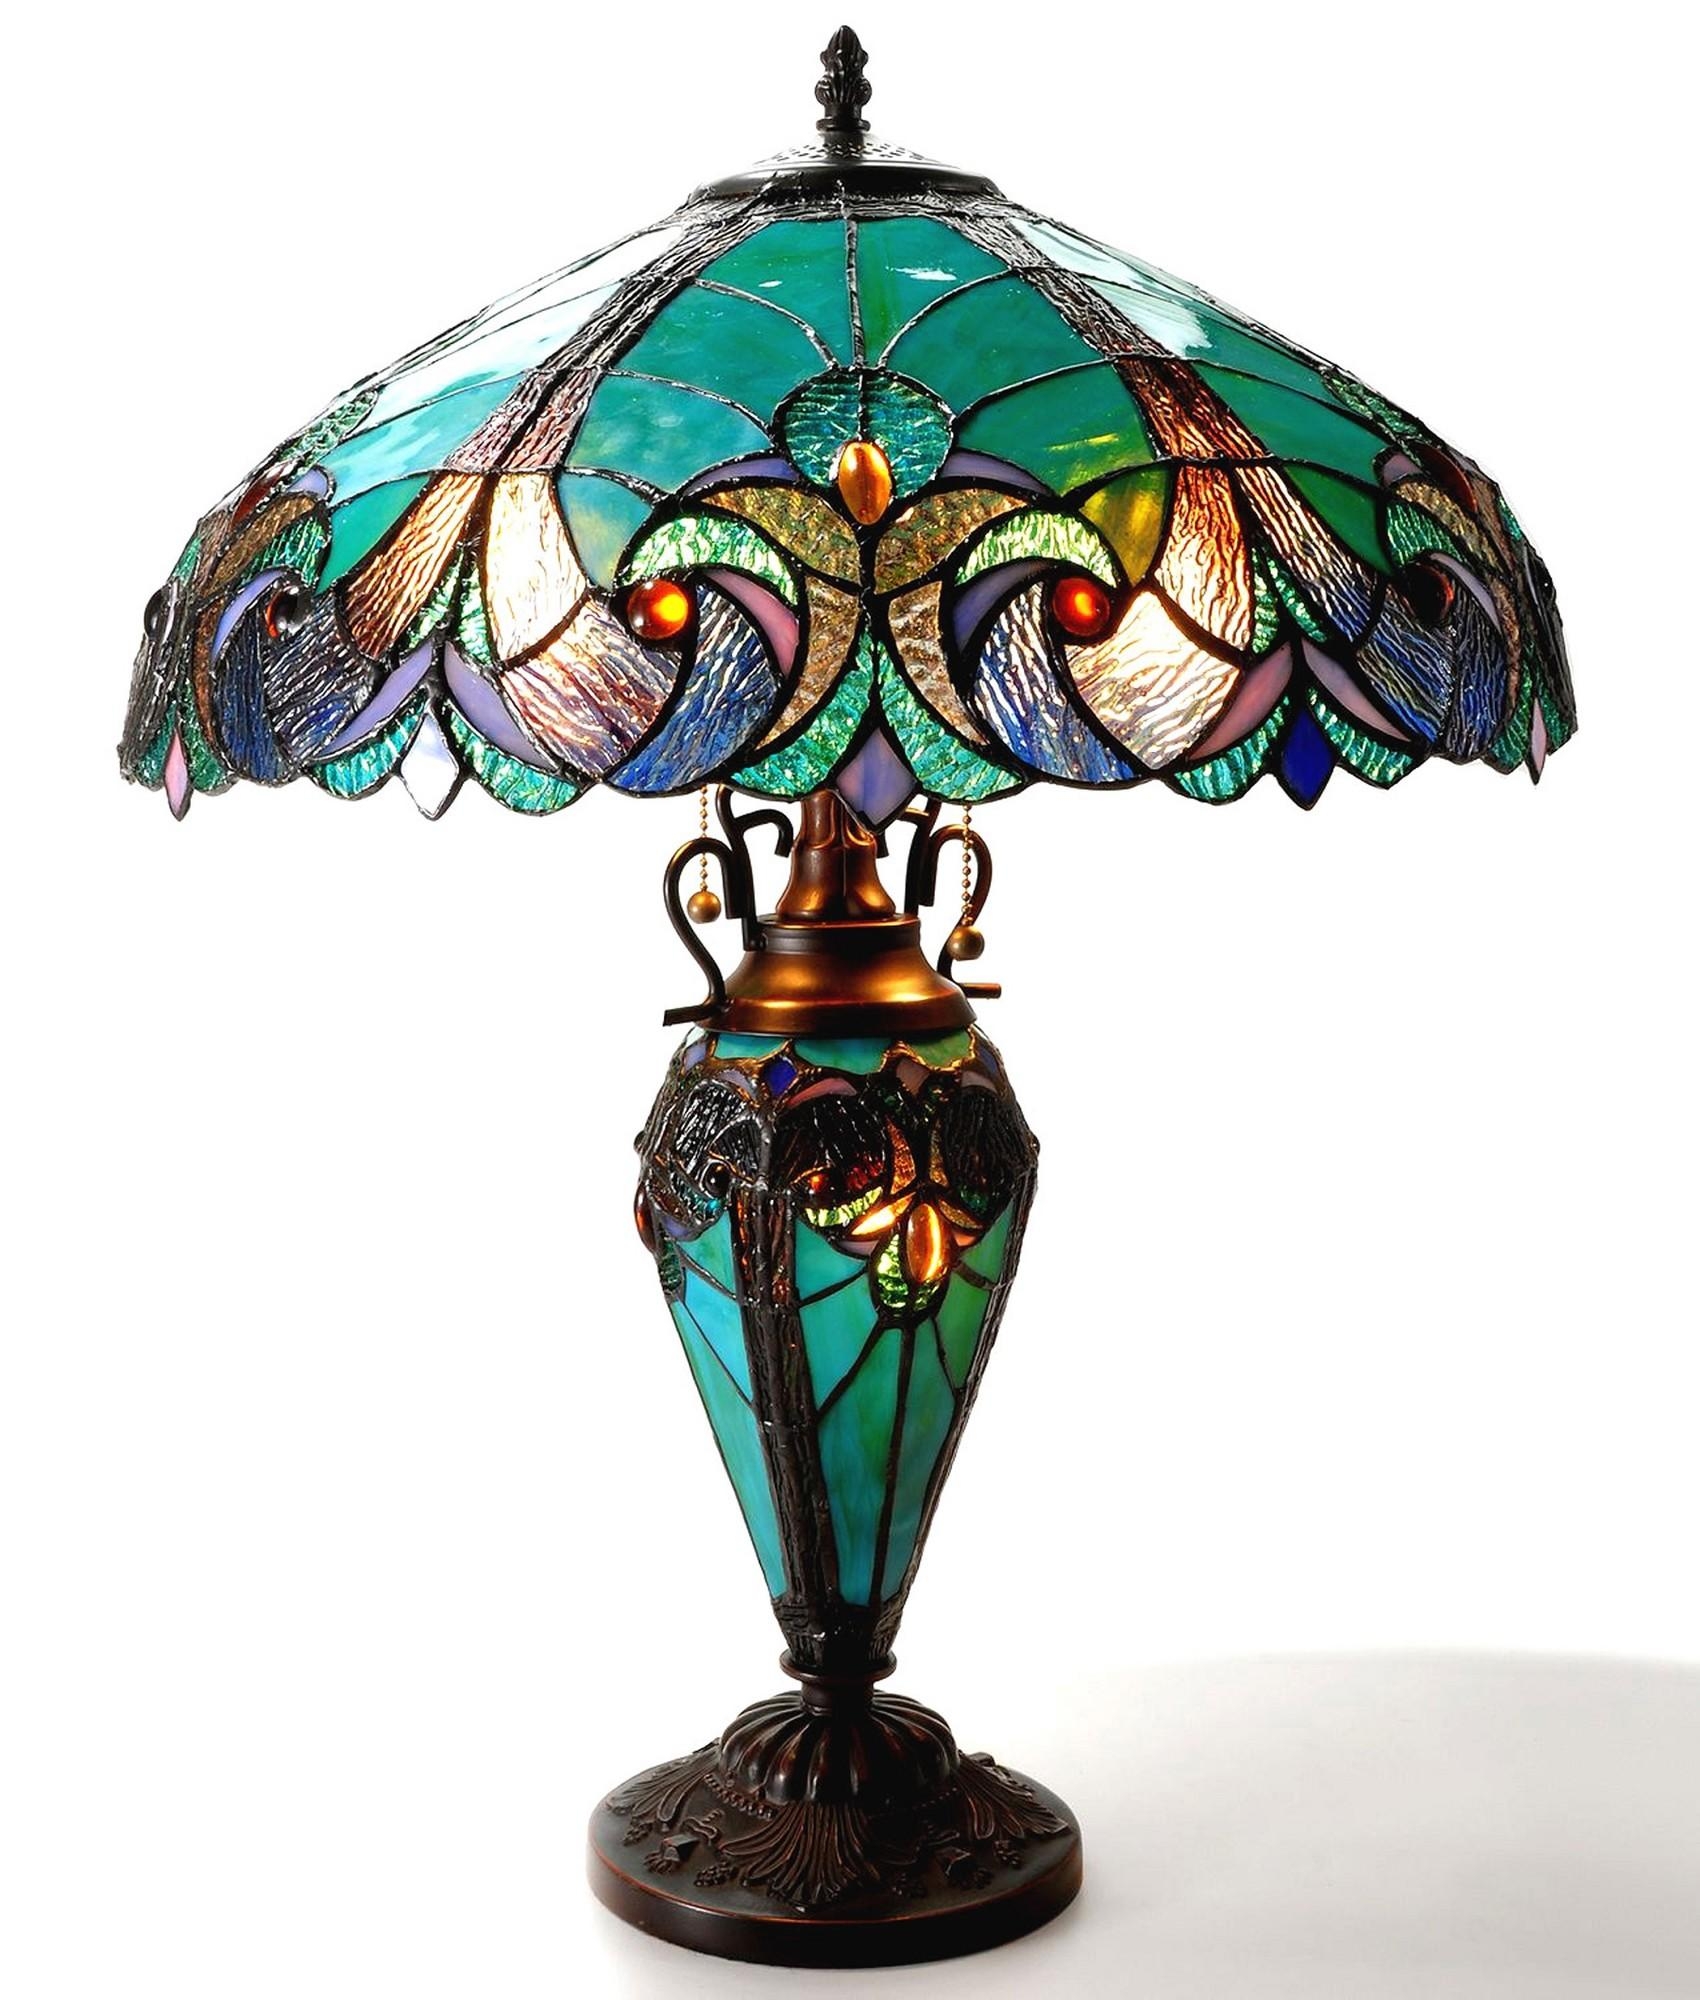 Tiffany Style Table Lamp With Night Light Vintage Stained Glass Teal Bedroom